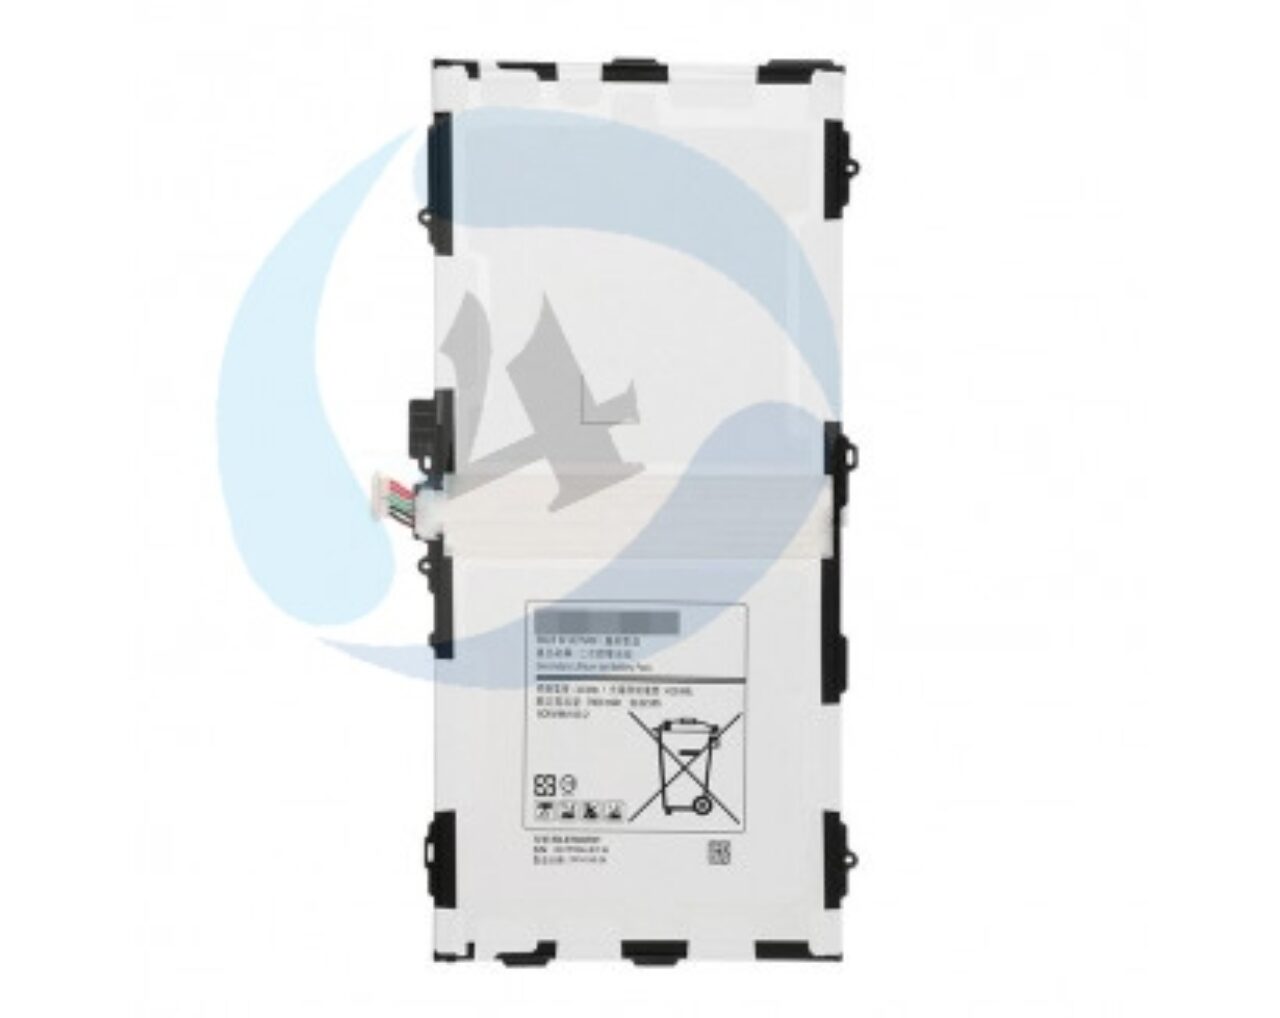 Battery for Samsung Galaxy Tab S 10 5 T800 T805